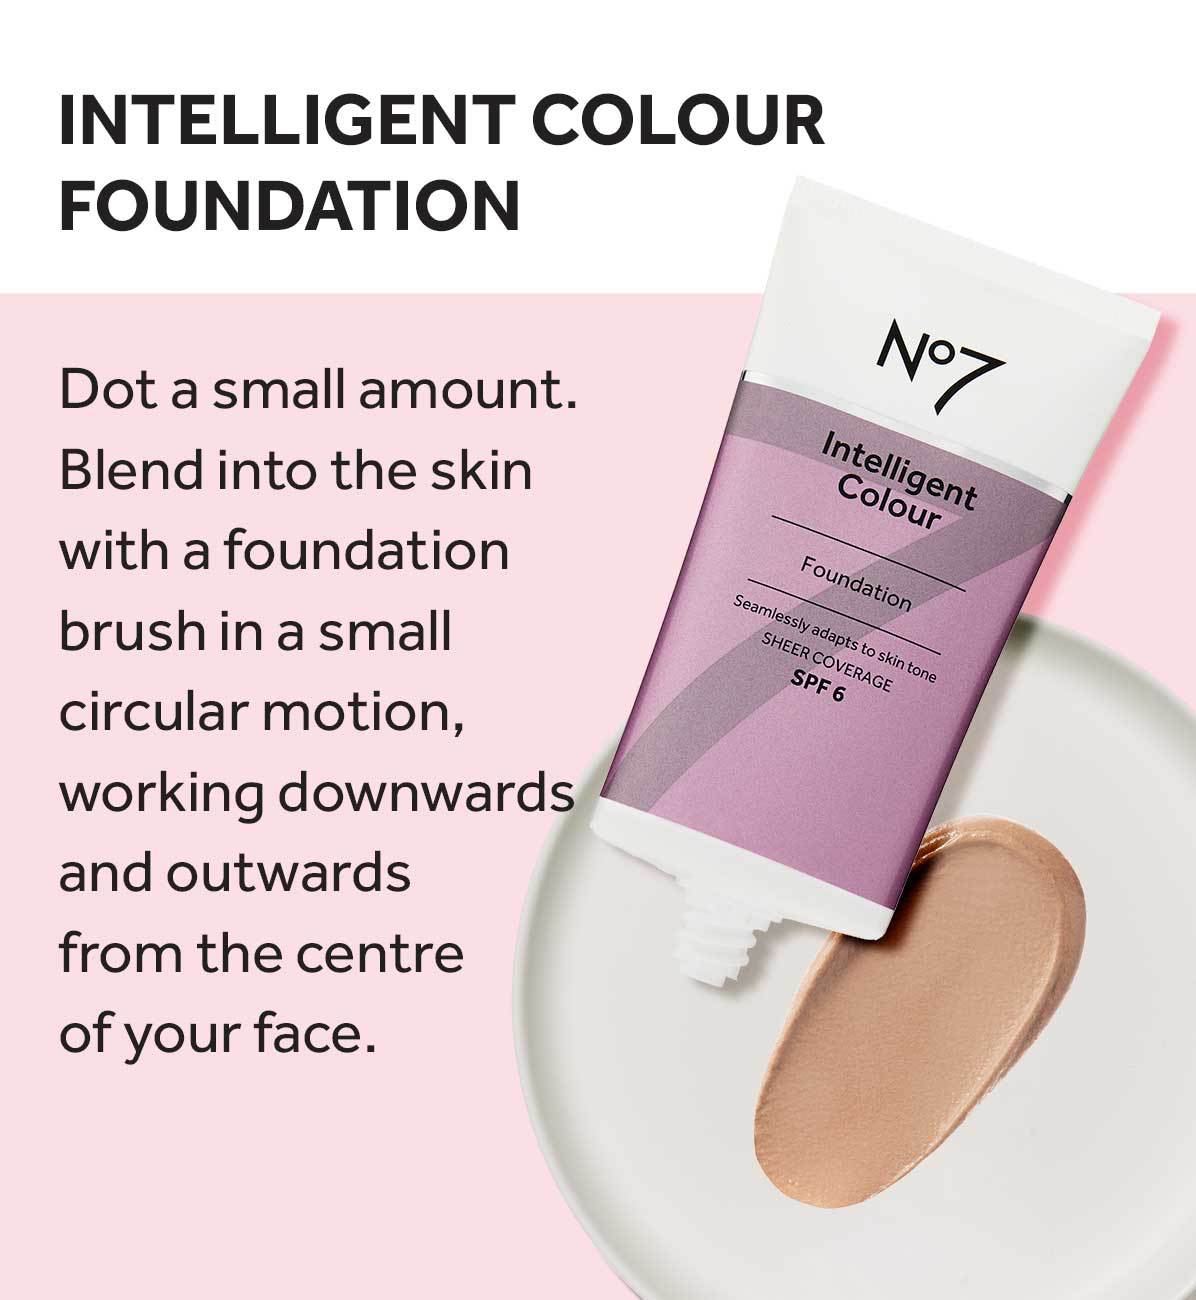 Intelligent colour foundation. Dot a small amount. Blend into the skin with a foundation brush in a small circular motion, working downwards and outwards from the centre of your face.